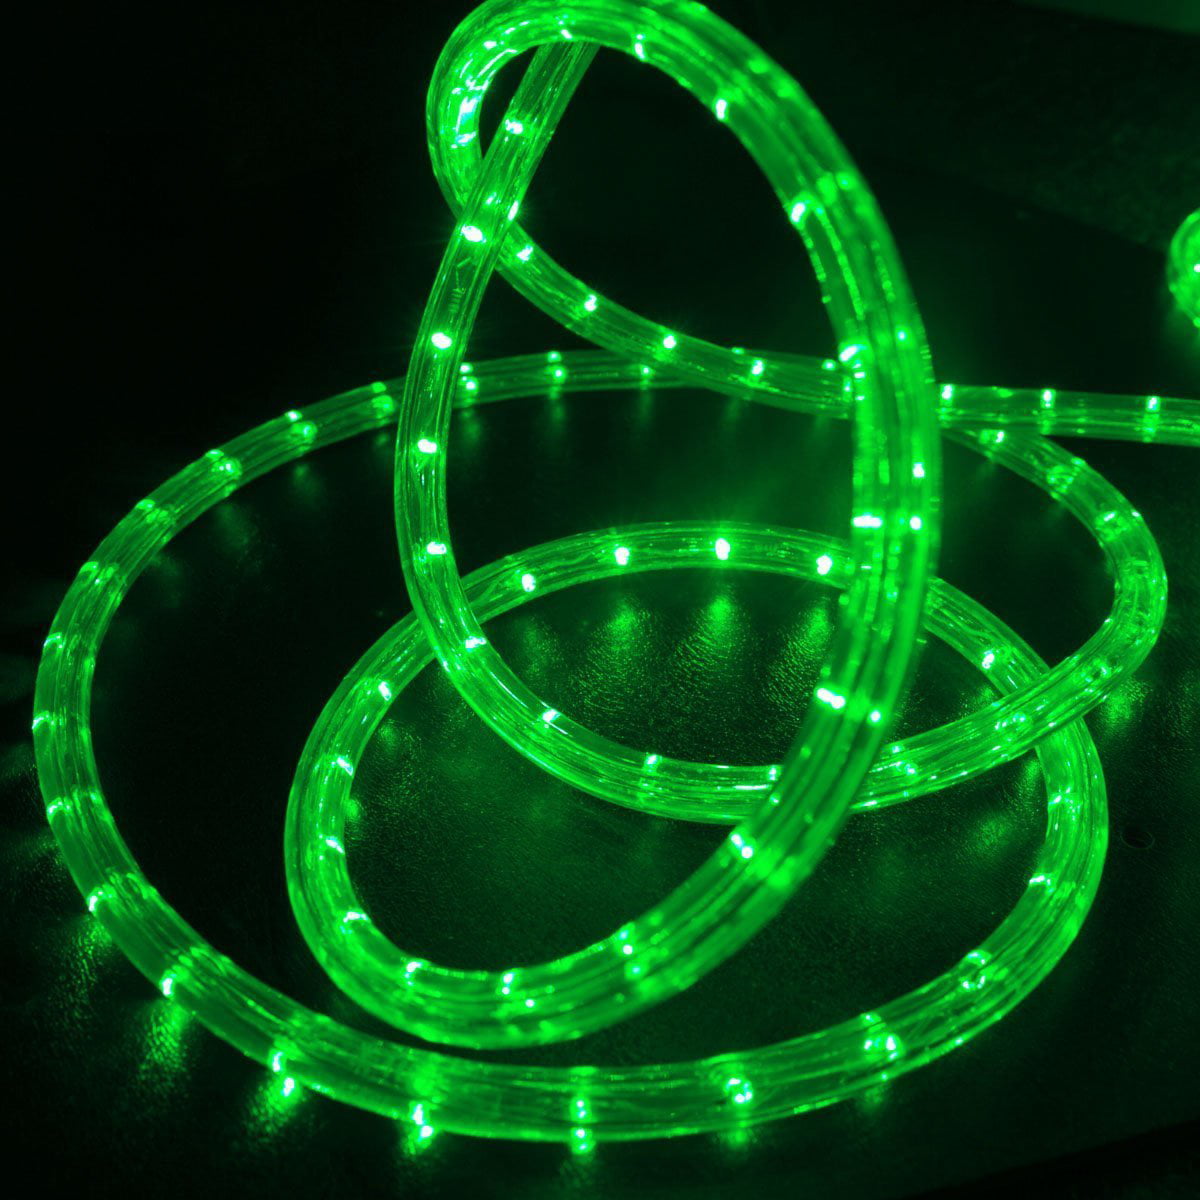 NEW FREE SHIPPING Details about   Celebrations Rope Lights 216 Green Lights 18' 